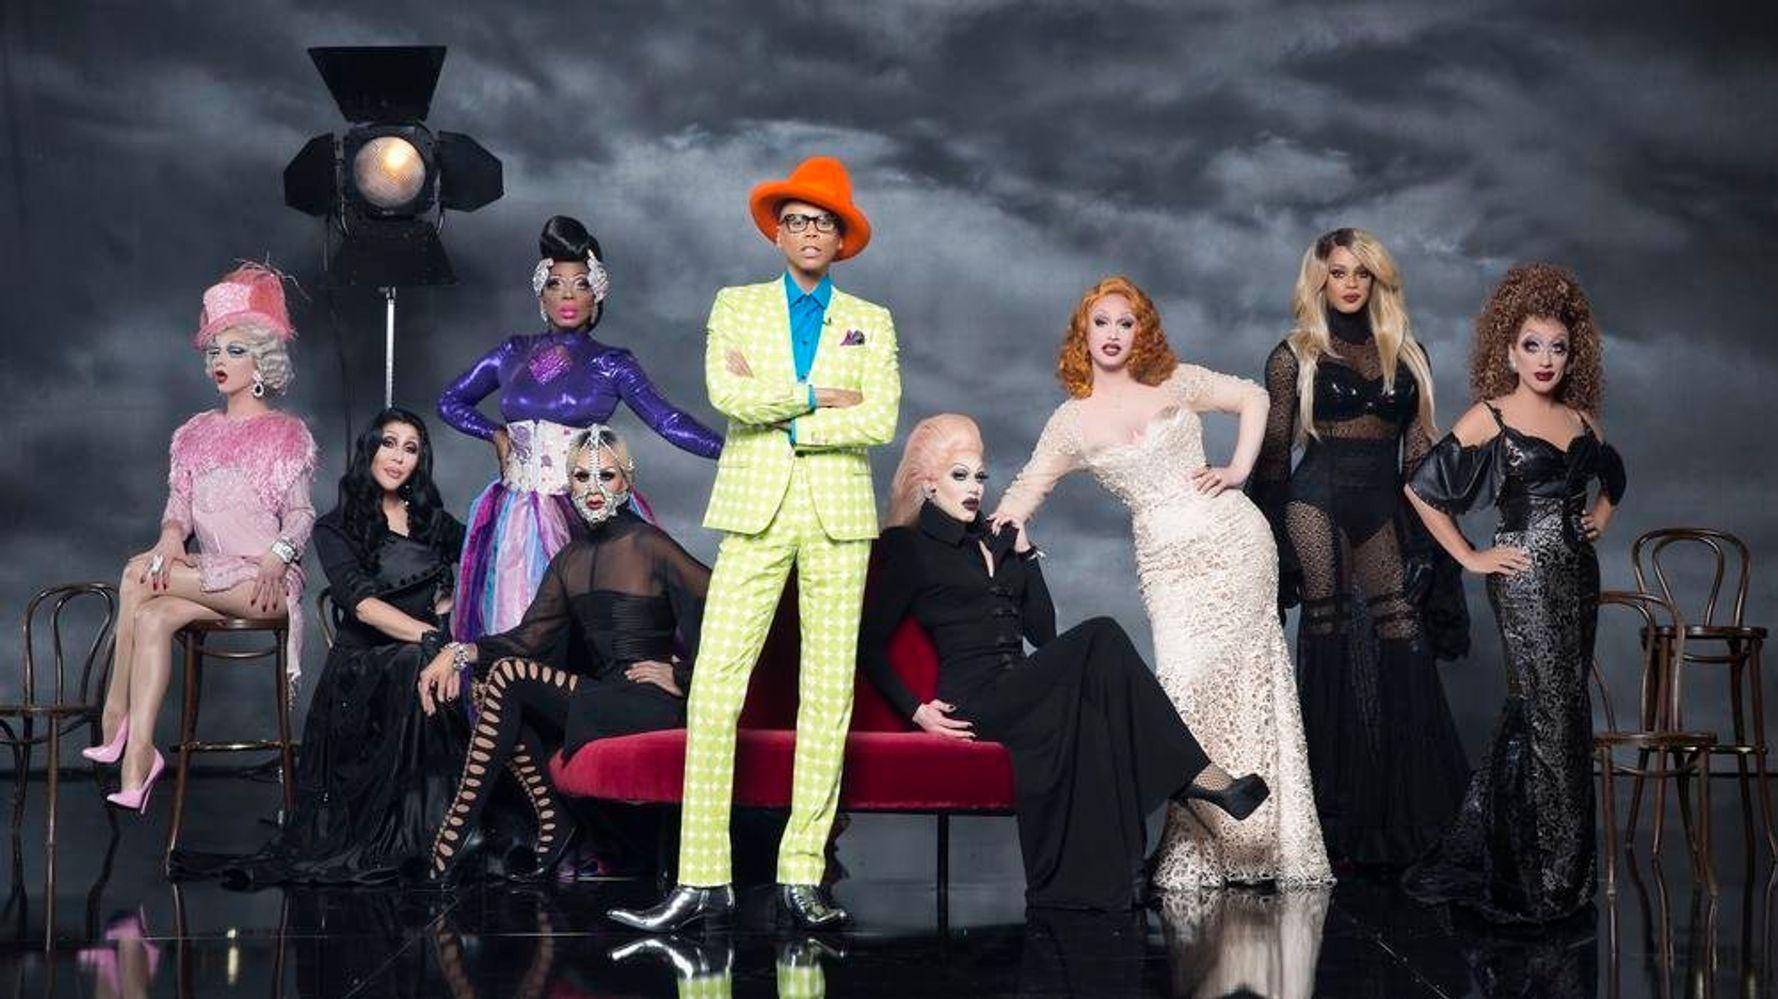 Rupaul's Drag Race Reality Series Background